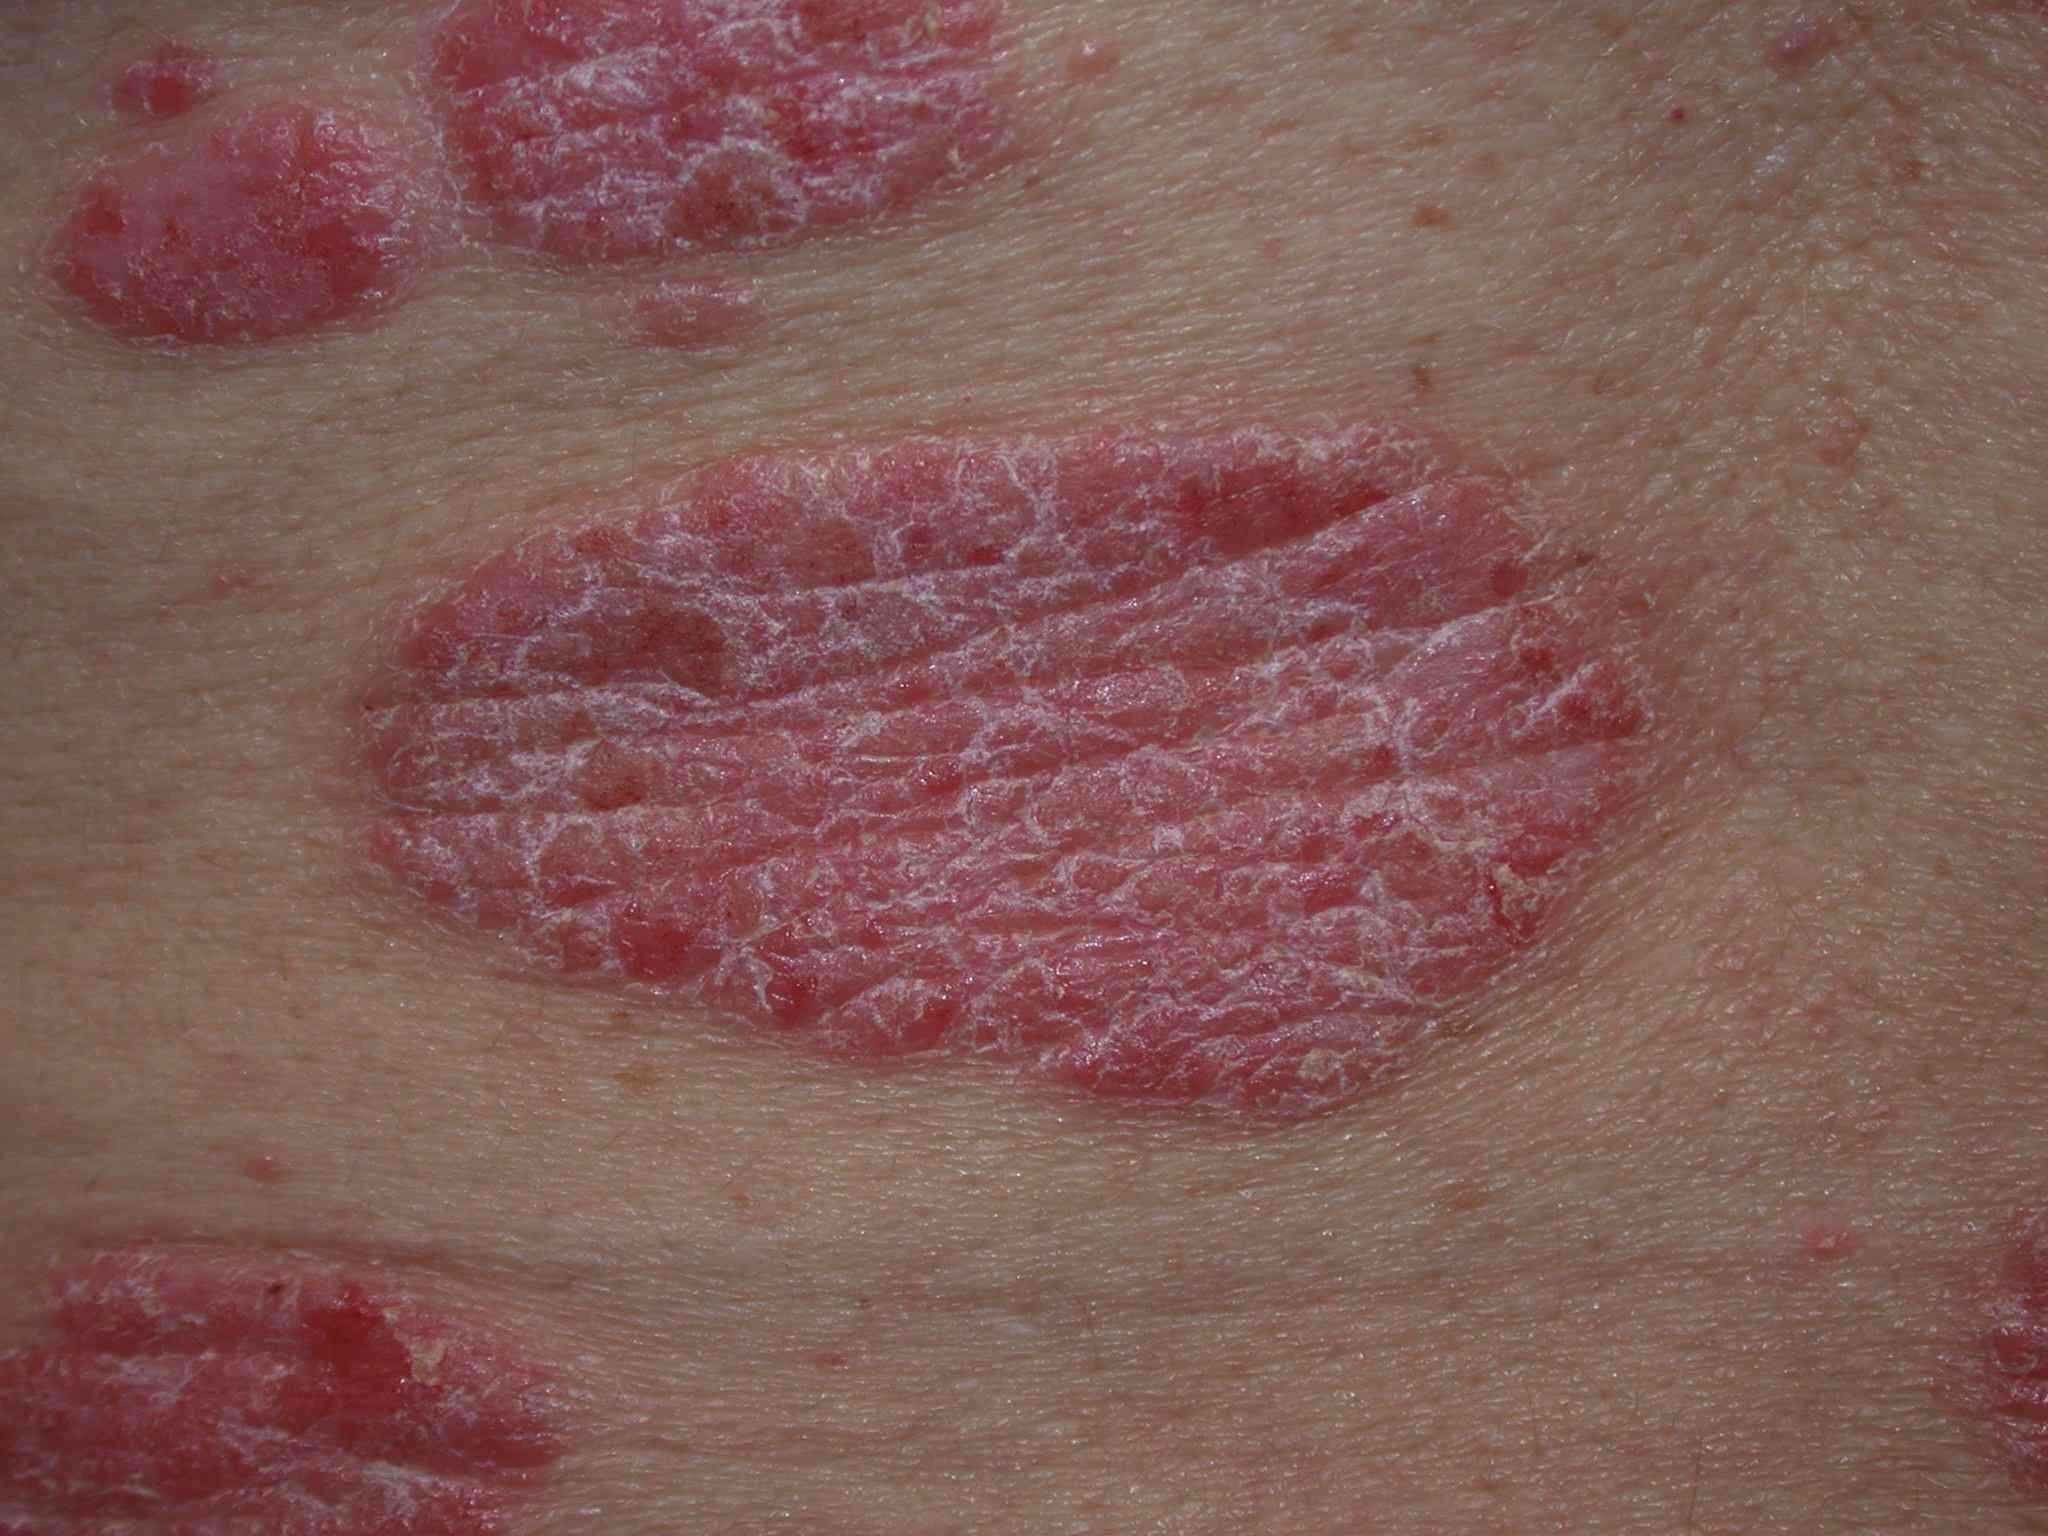 60-facts-about-psoriasis